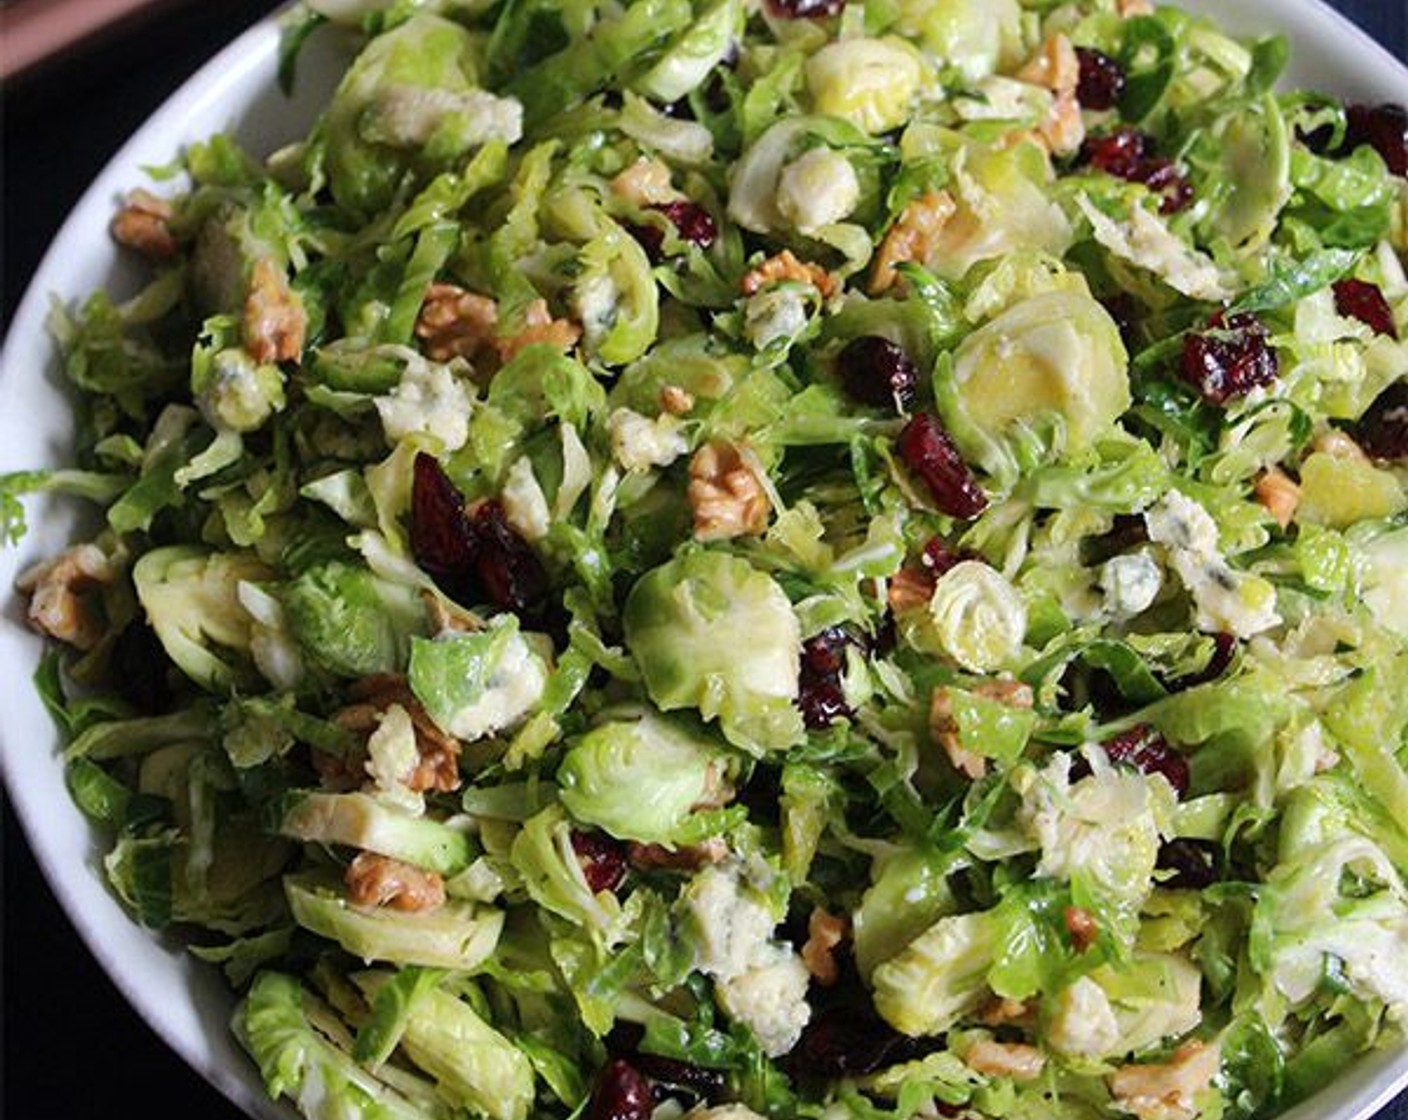 Shredded Brussels Sprouts Salad with Walnuts, Cranberries and Blue Cheese